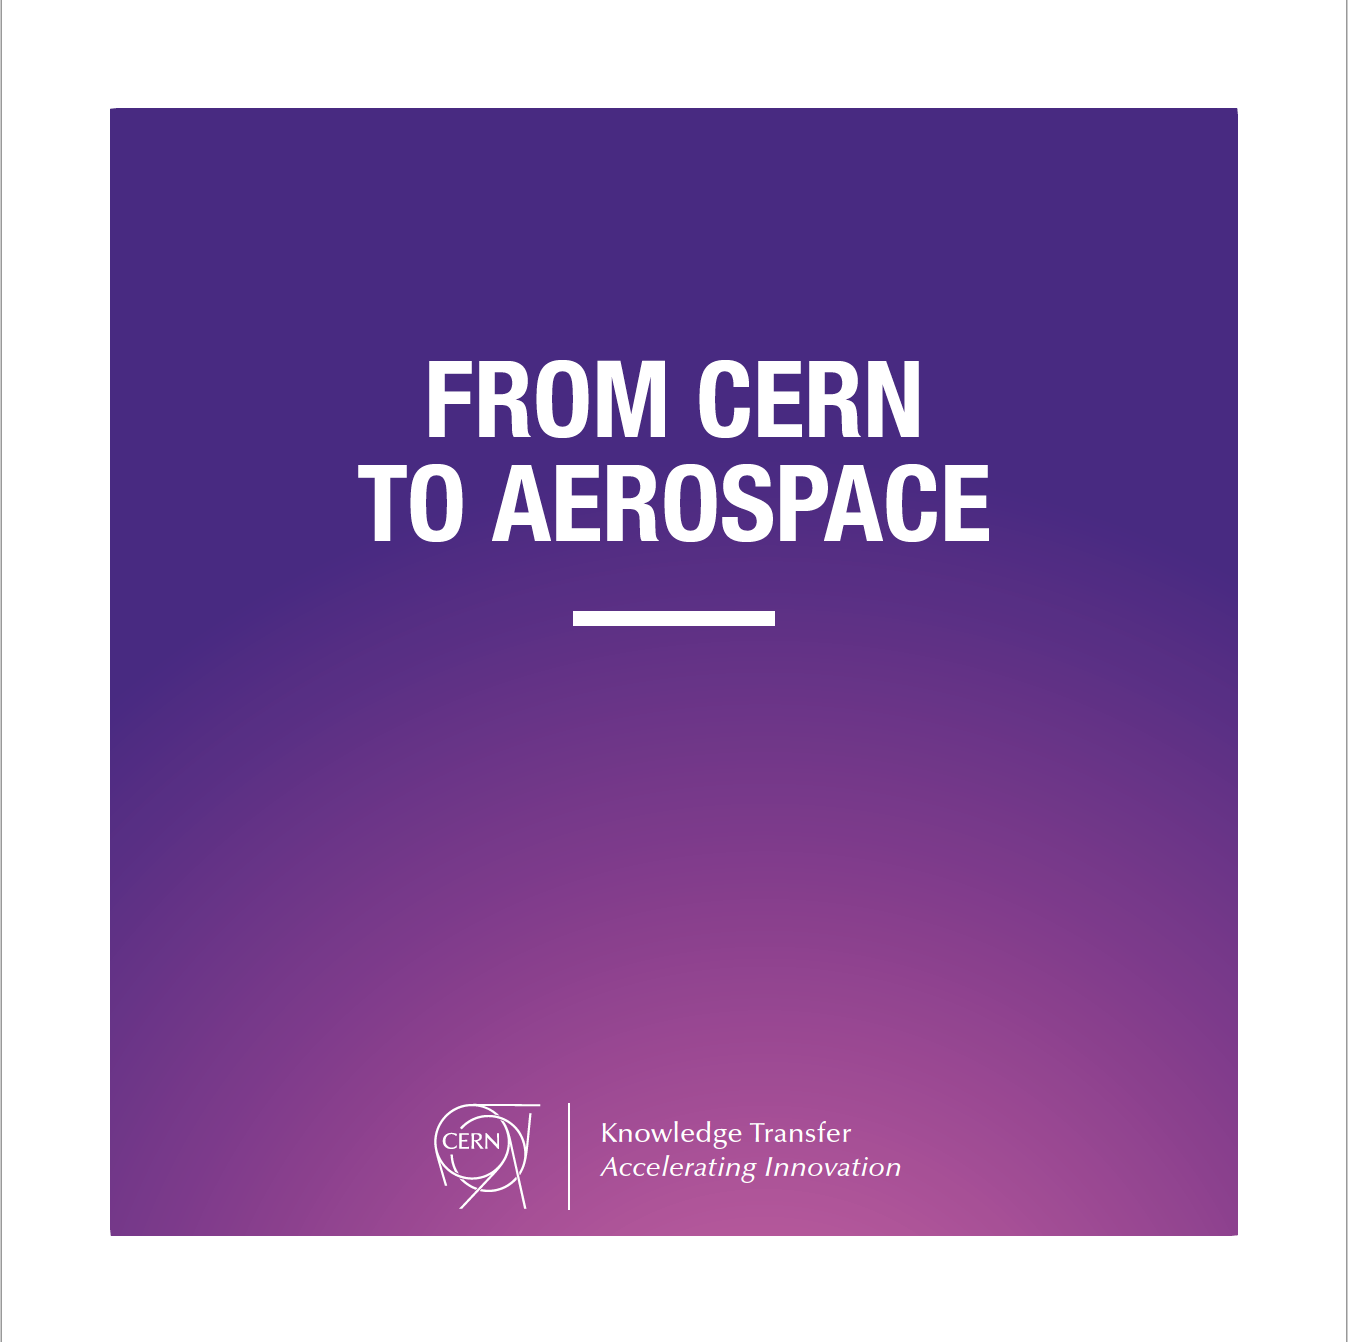 From CERN to Aerospace